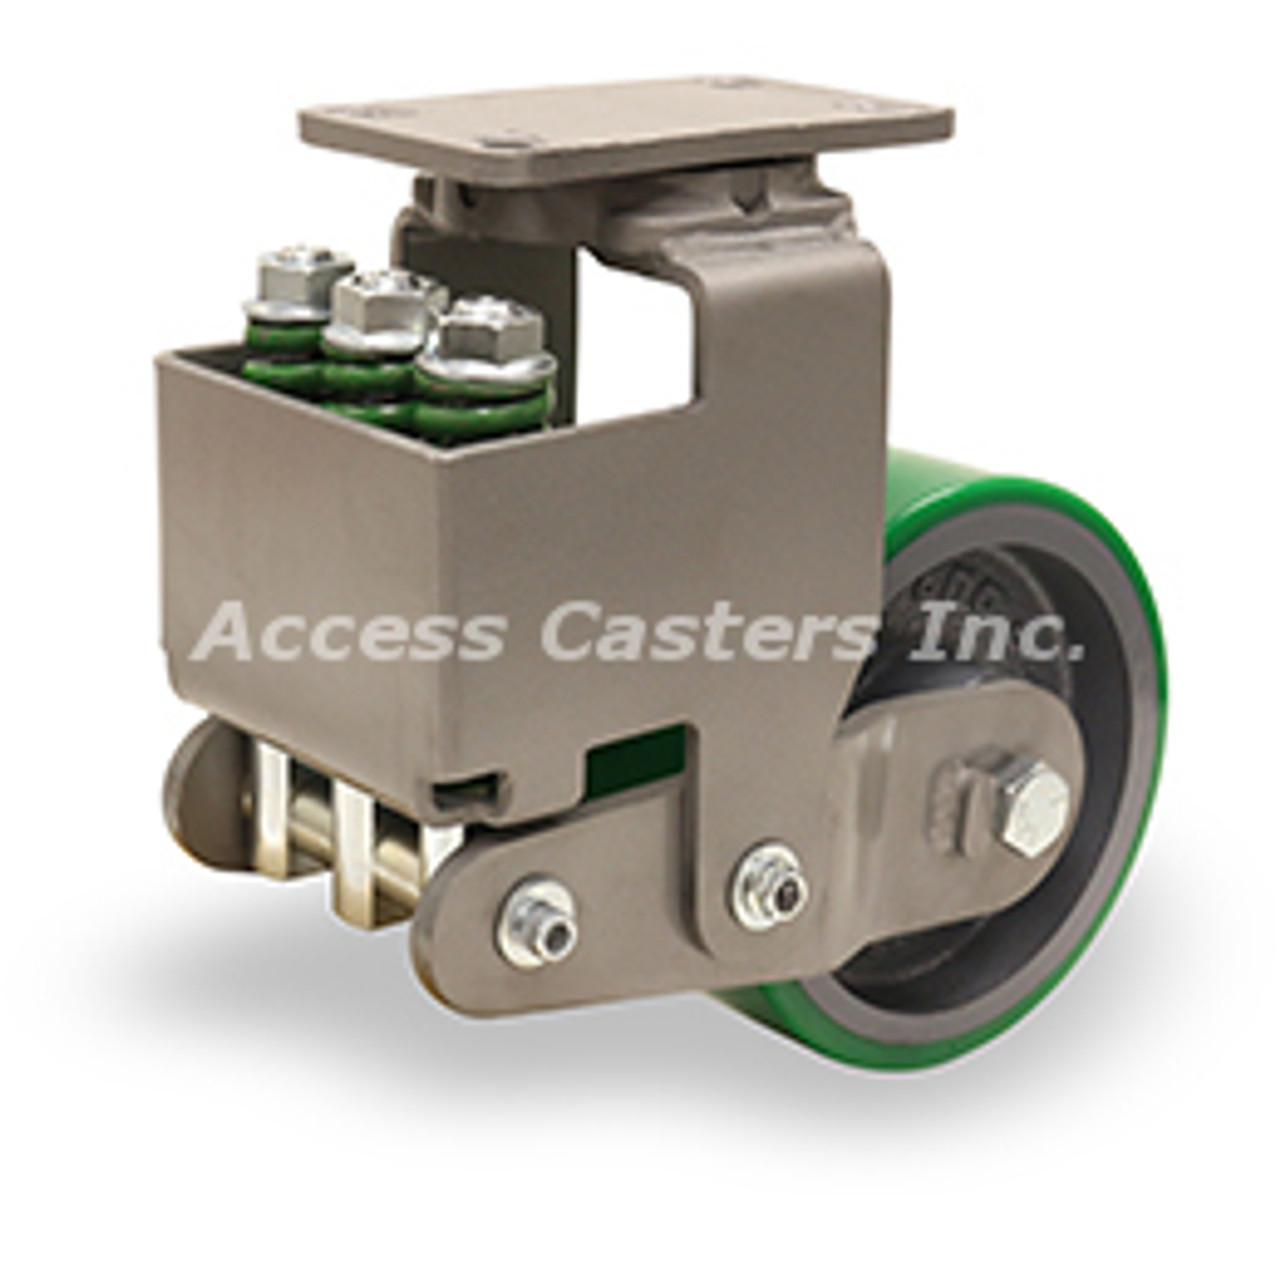 S-AEZFFM-63DB Spring loaded caster with 6" x 3" Duralast wheel